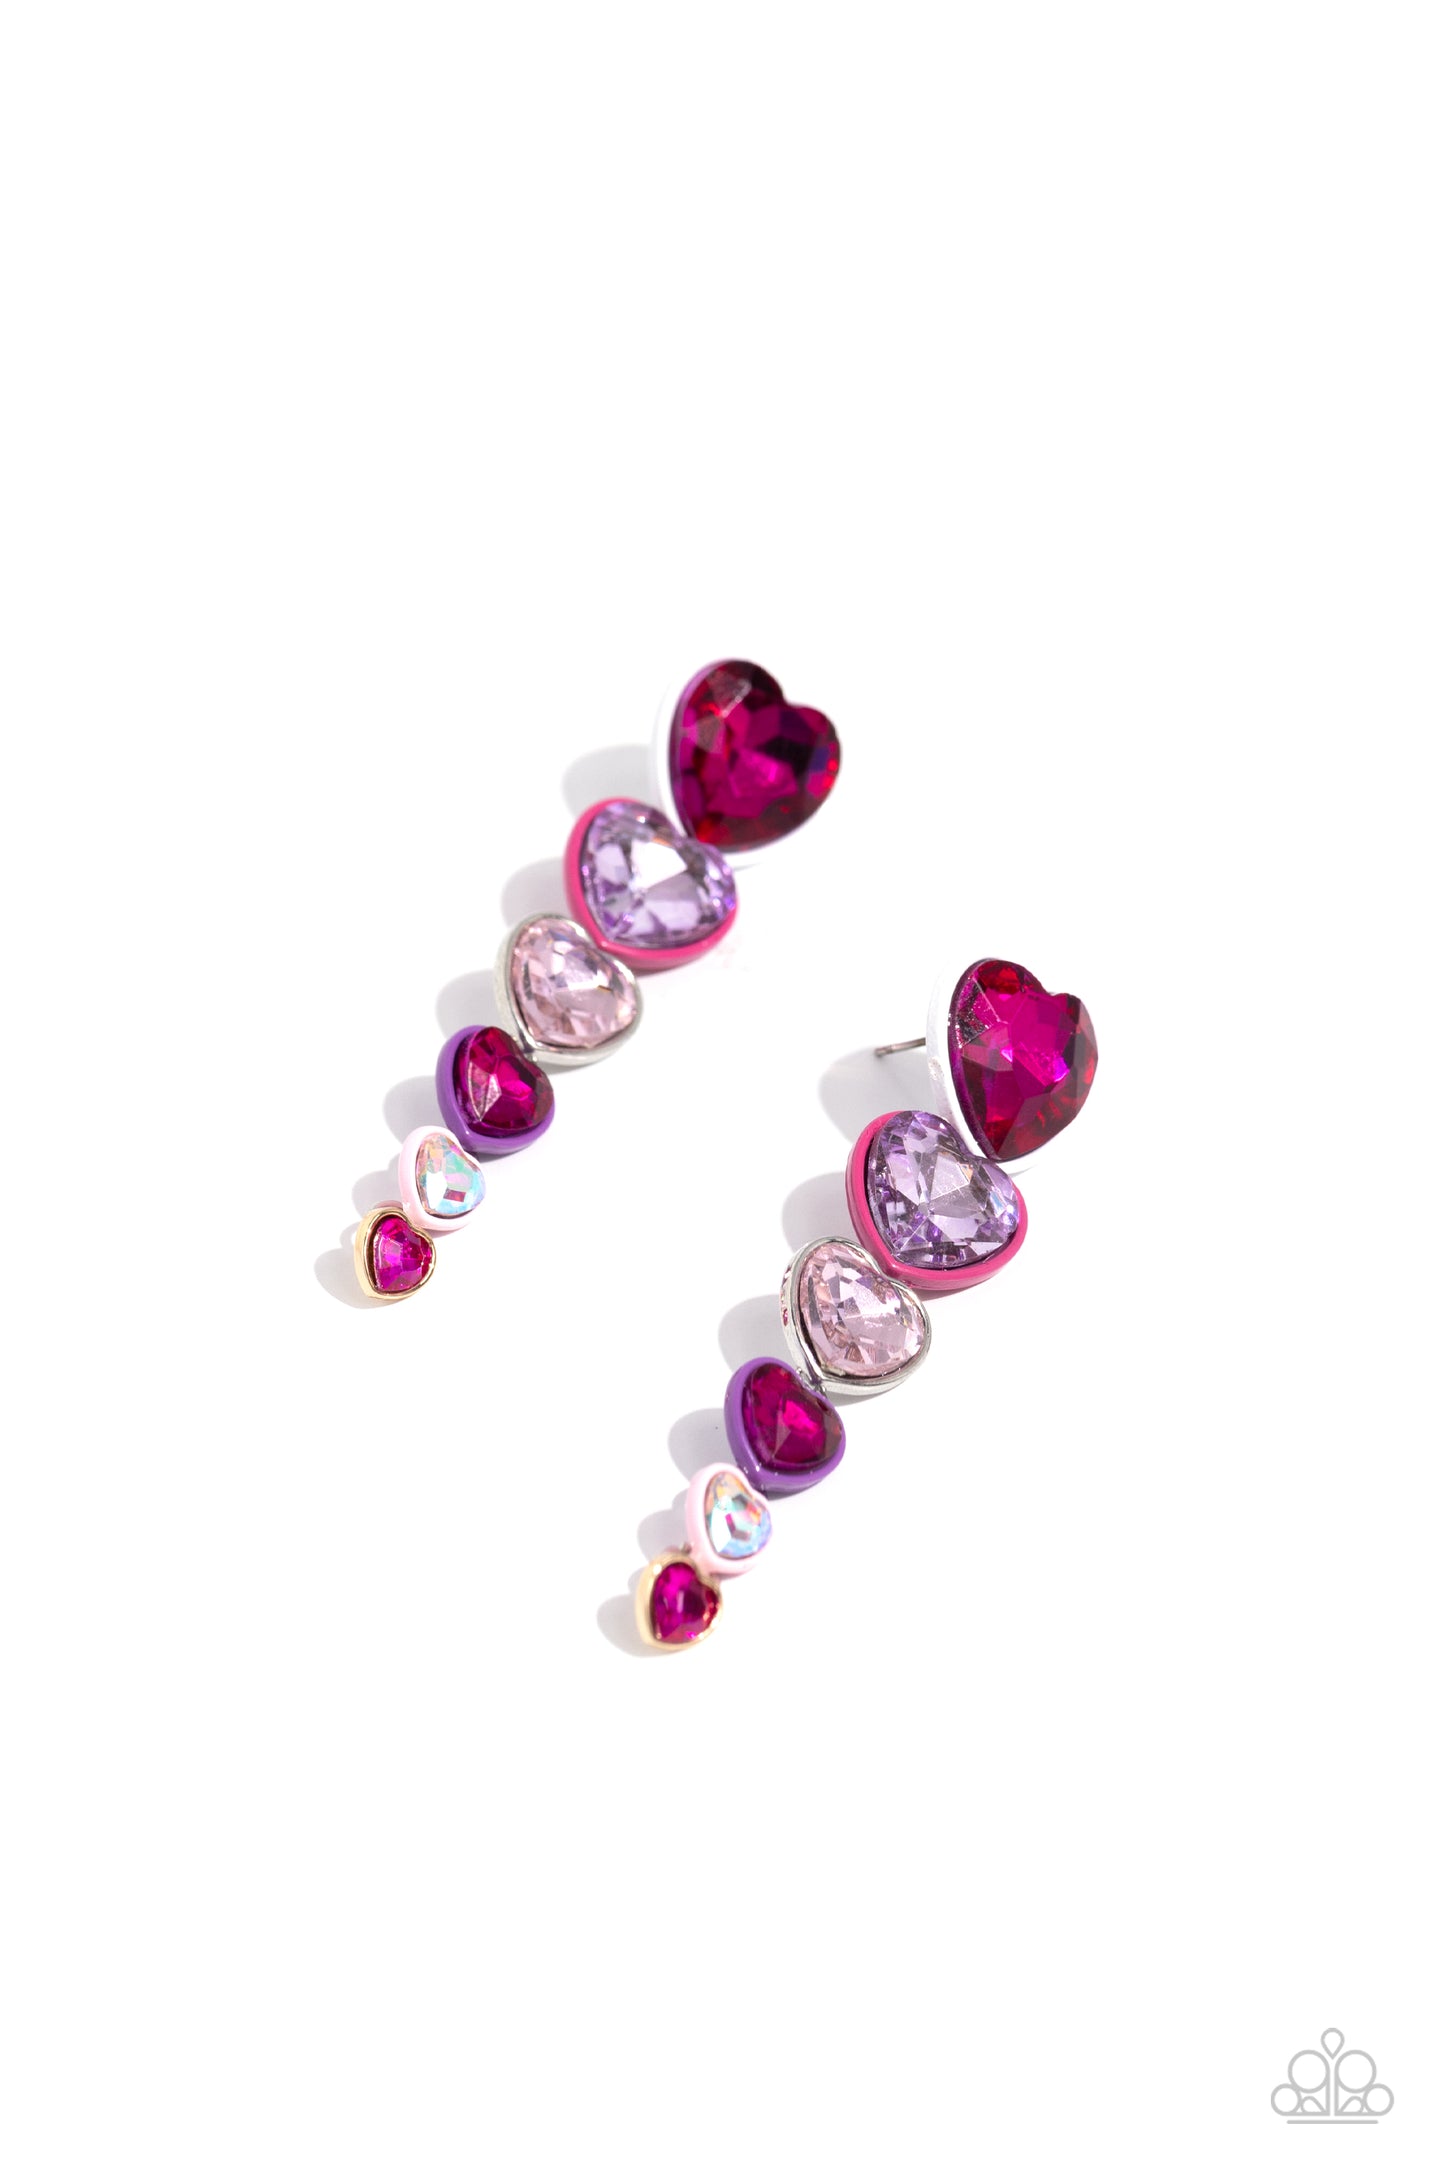 Cascading Casanova Multi Heart Post Earring - Paparazzi Accessories  Featuring sleek multicolored-painted fittings, faceted red, purple, white, fuchsia, and iridescent heart gems gradually decrease in size as they trickle from the ear for a glamorously romantic look. Earring attaches to a standard post fitting. Due to its prismatic palette, color may vary.  Sold as one pair of post earrings.